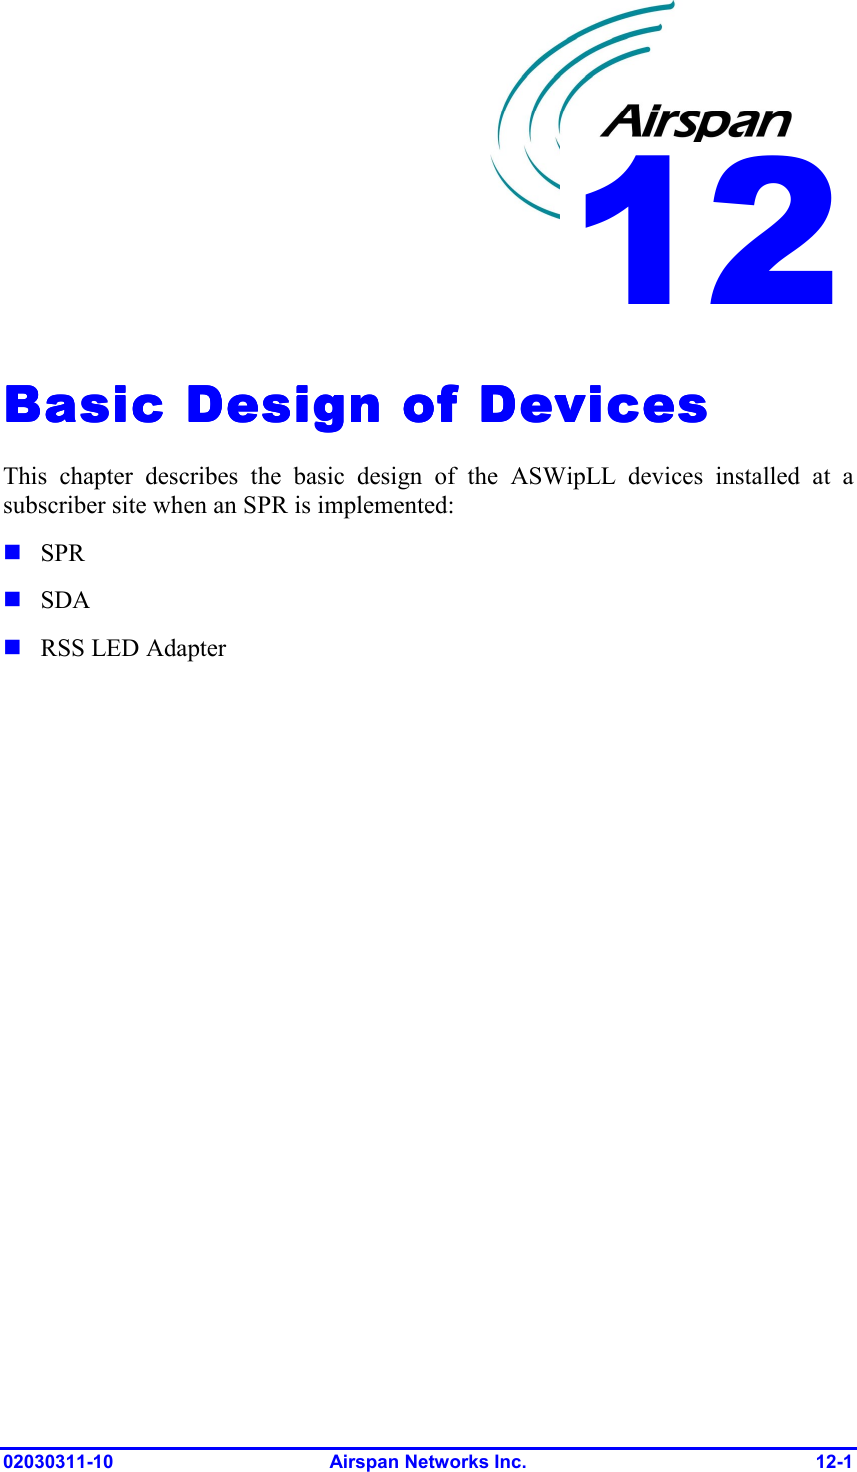  02030311-10 Airspan Networks Inc.  12-1 Basic Design of DeviBasic Design of DeviBasic Design of DeviBasic Design of Devicescescesces    This chapter describes the basic design of the ASWipLL devices installed at a subscriber site when an SPR is implemented:  SPR  SDA  RSS LED Adapter  12